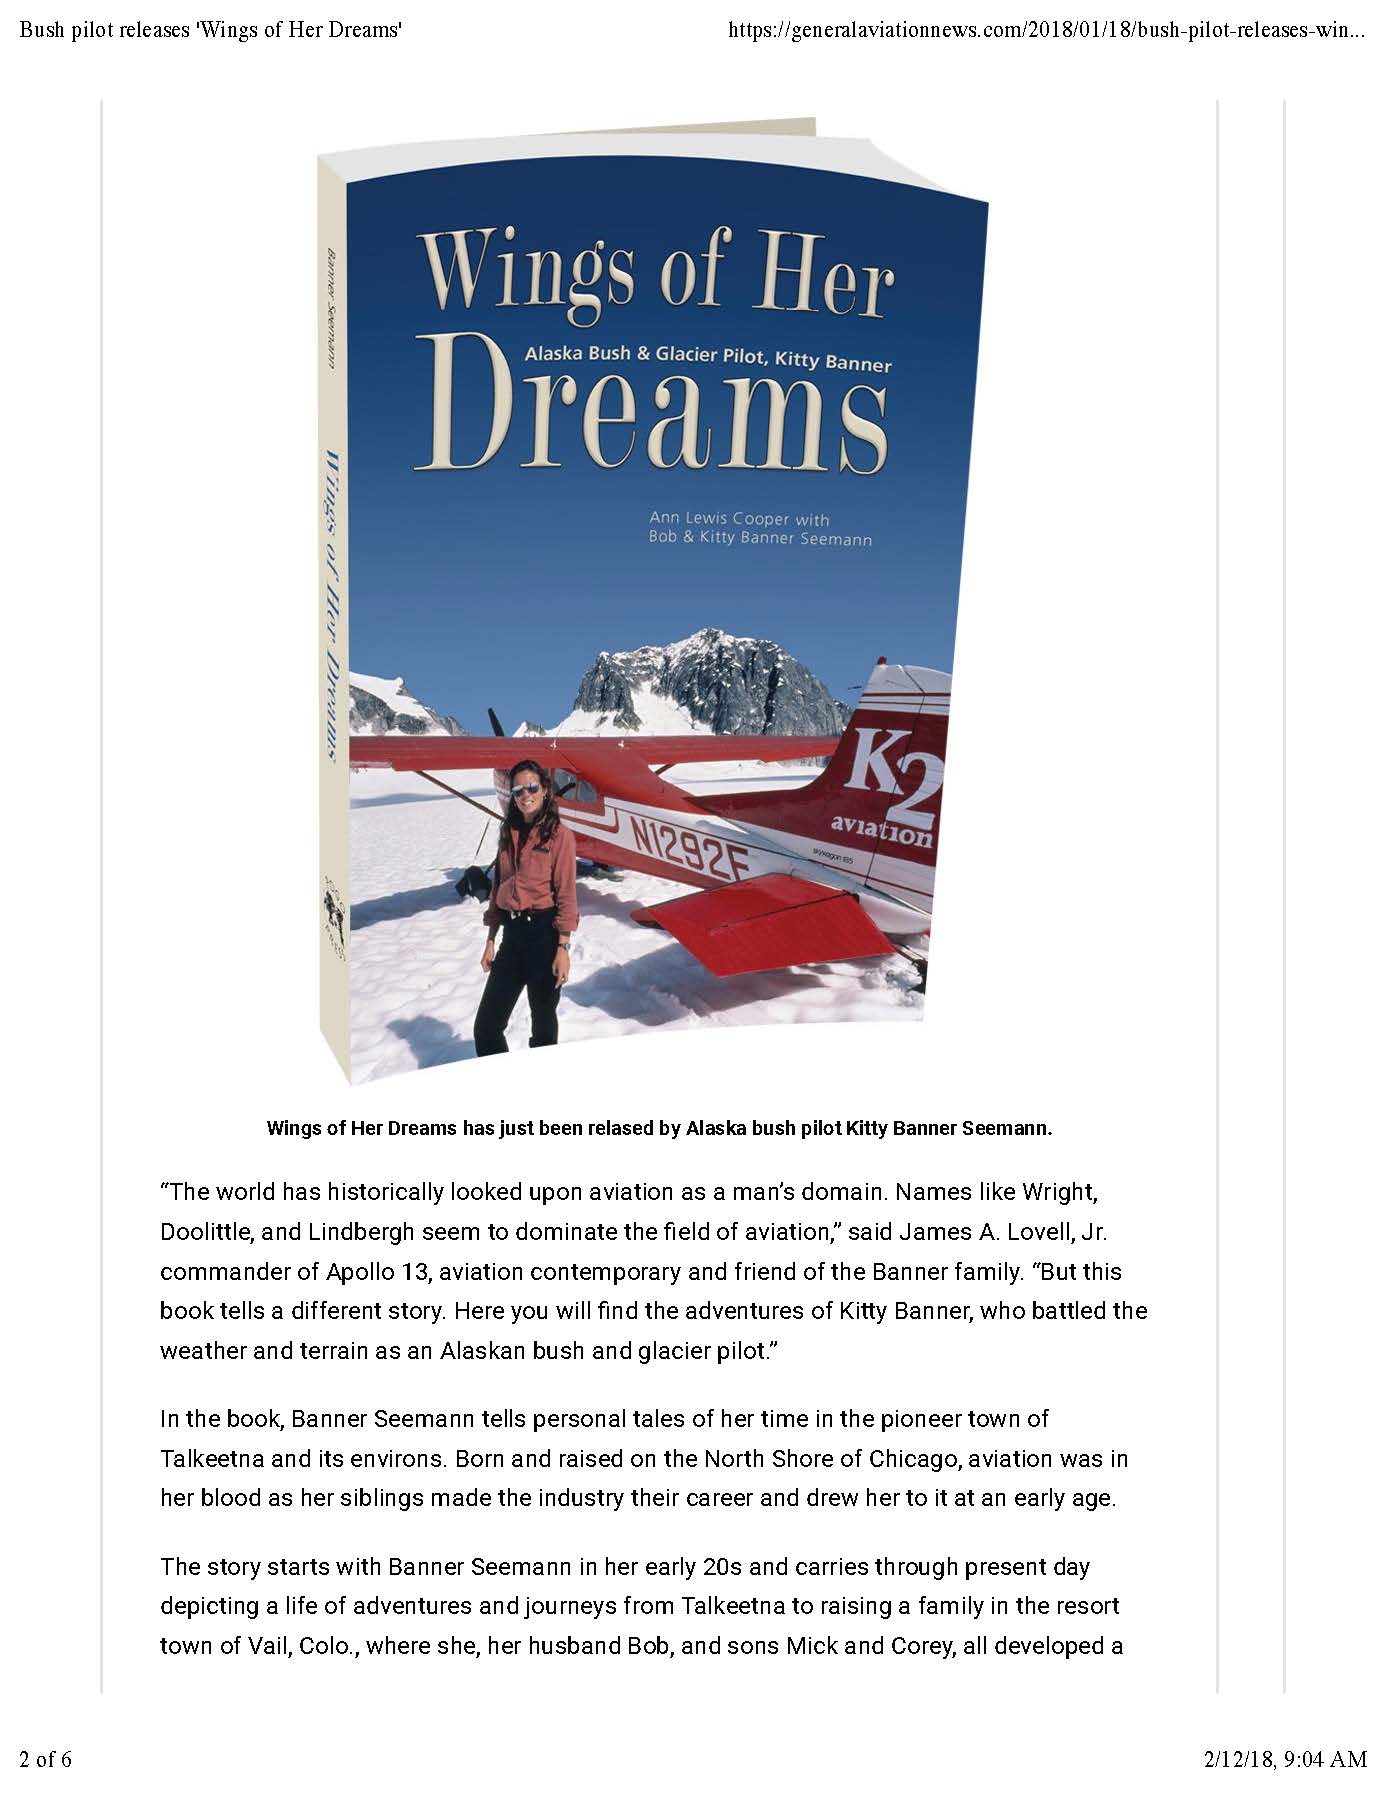 General Aviation News Bush pilot releases 'Wings of Her Dreams' 1.18.18_Page_2.jpg